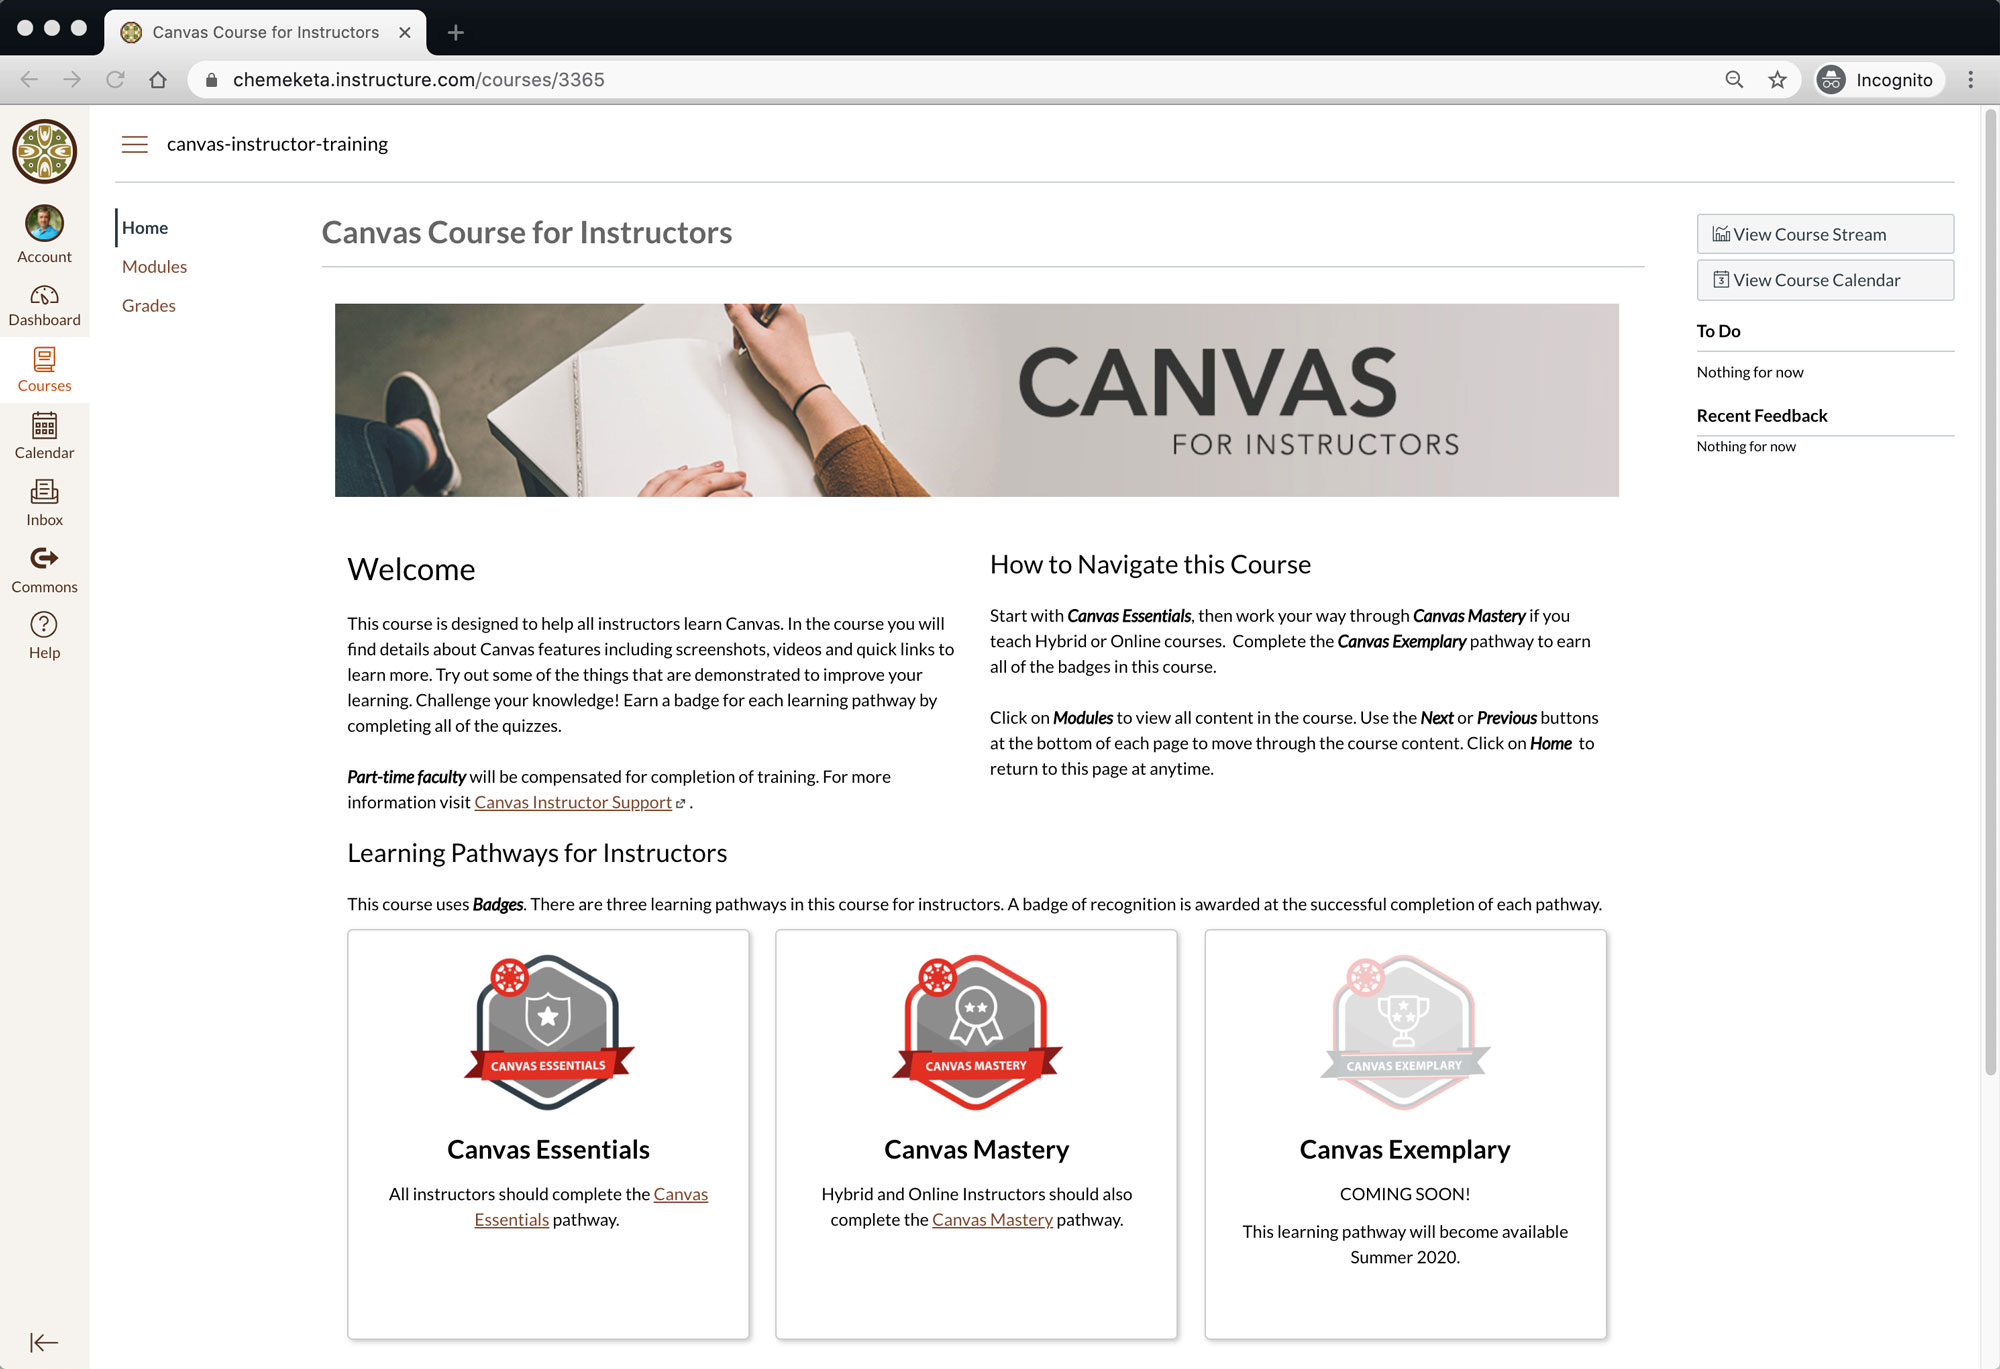 Screenshot of the Canvas for Instructors course.